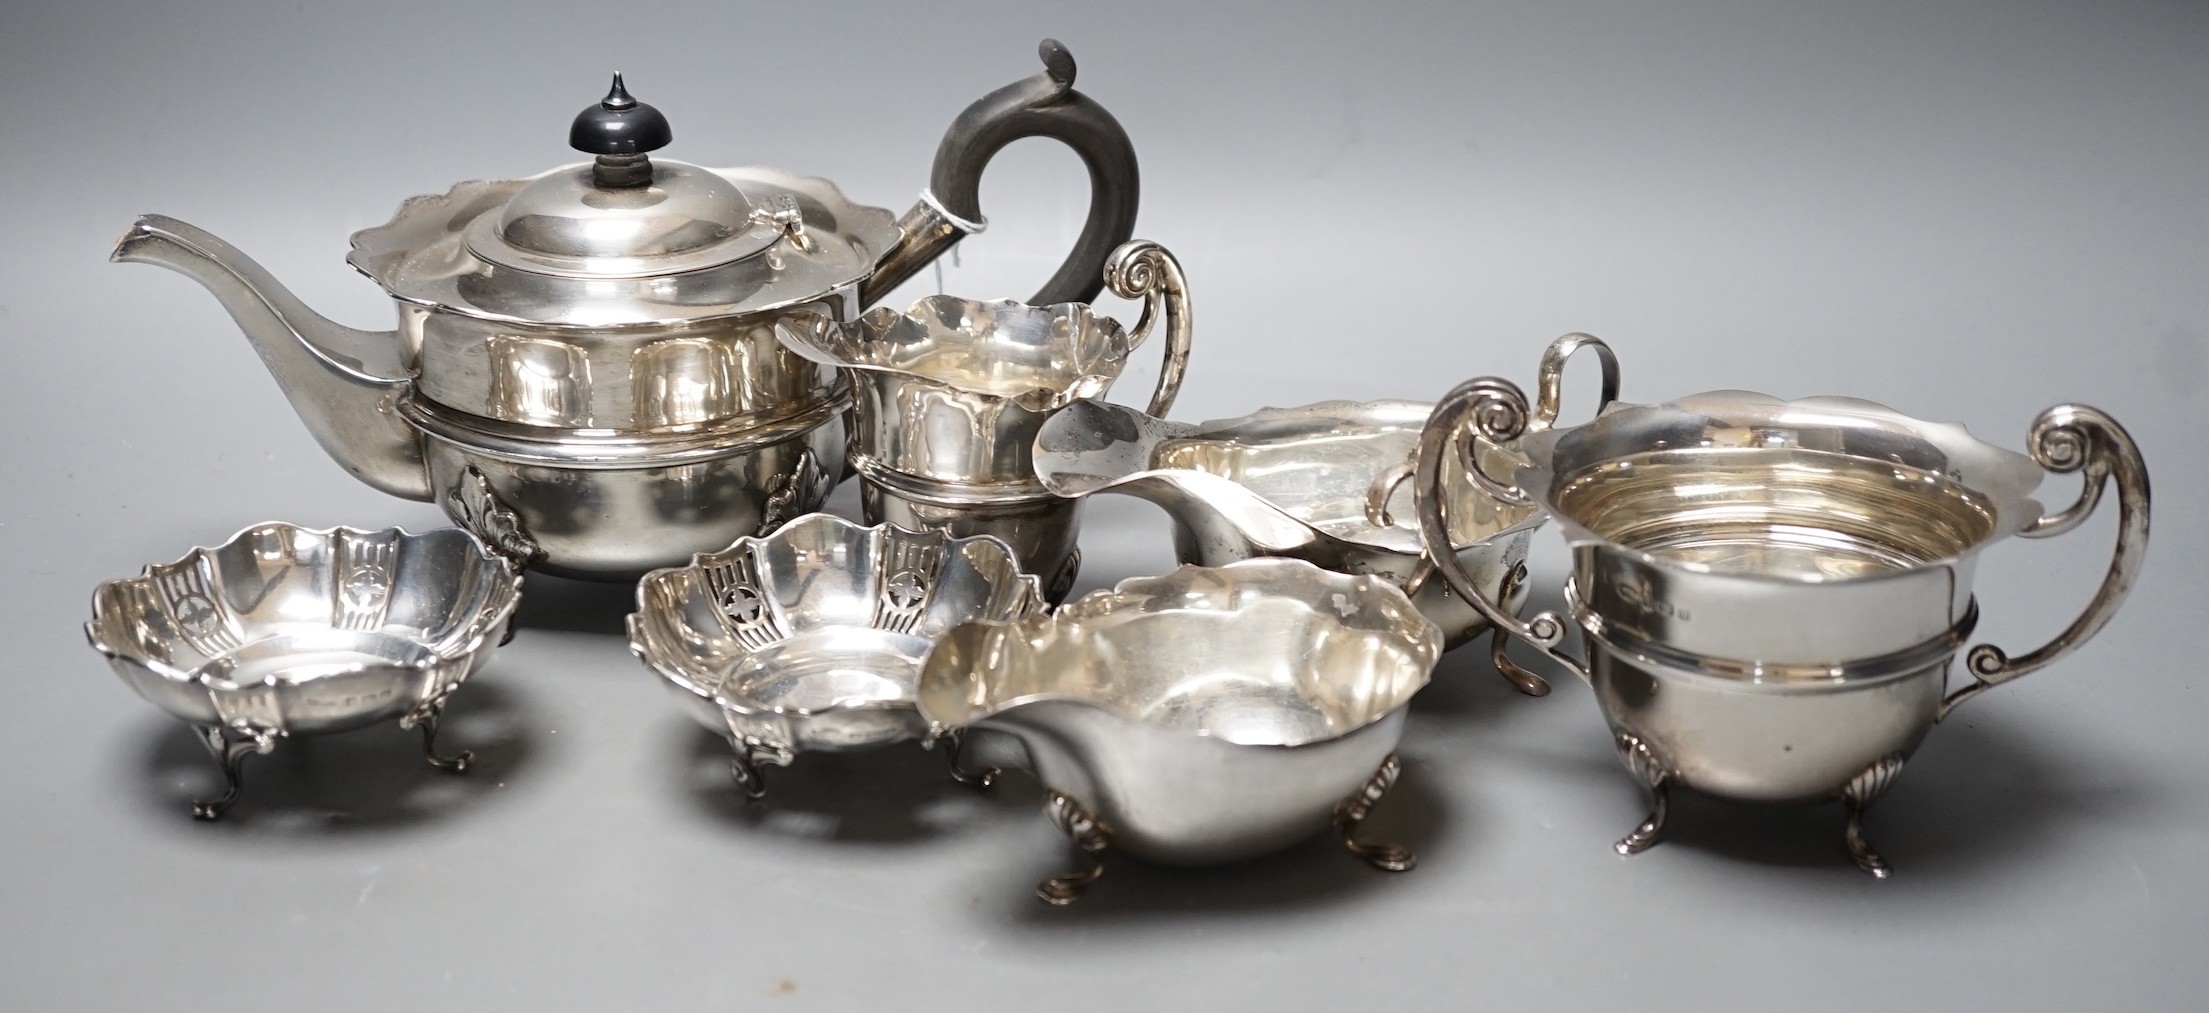 Small silver including tea pot, cream and sugar, two sauceboats and a pair of small dishes, 29.9oz.                                                                                                                         